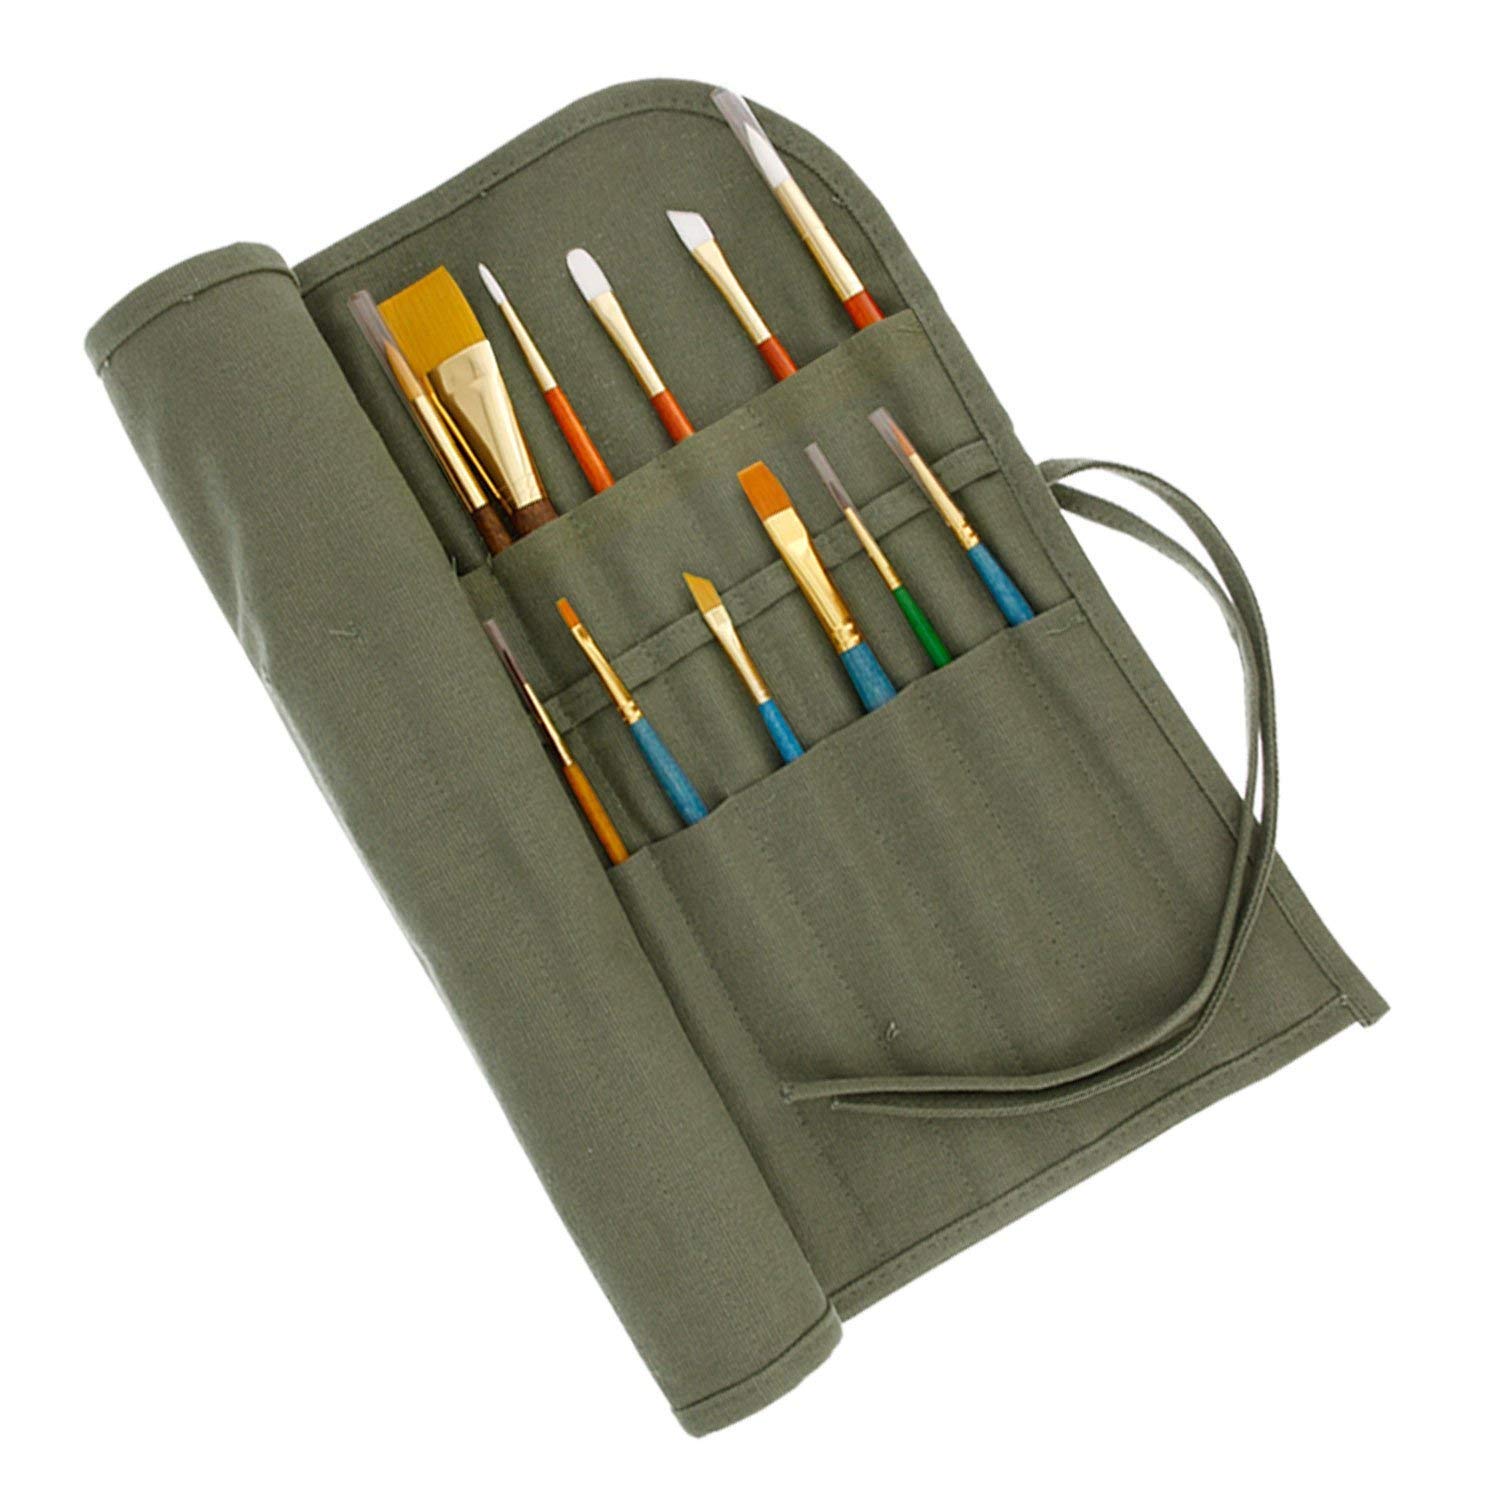 U.S. Art Supply Deluxe Canvas Art Paint Brush Holder & Storage Organizer  Roll-Up Case Bag - 24 Slot Pockets Carry Pouch - Protect Artist Acrylic Oil  Watercolor Paintbrushes - Store Pencils Pens Tools